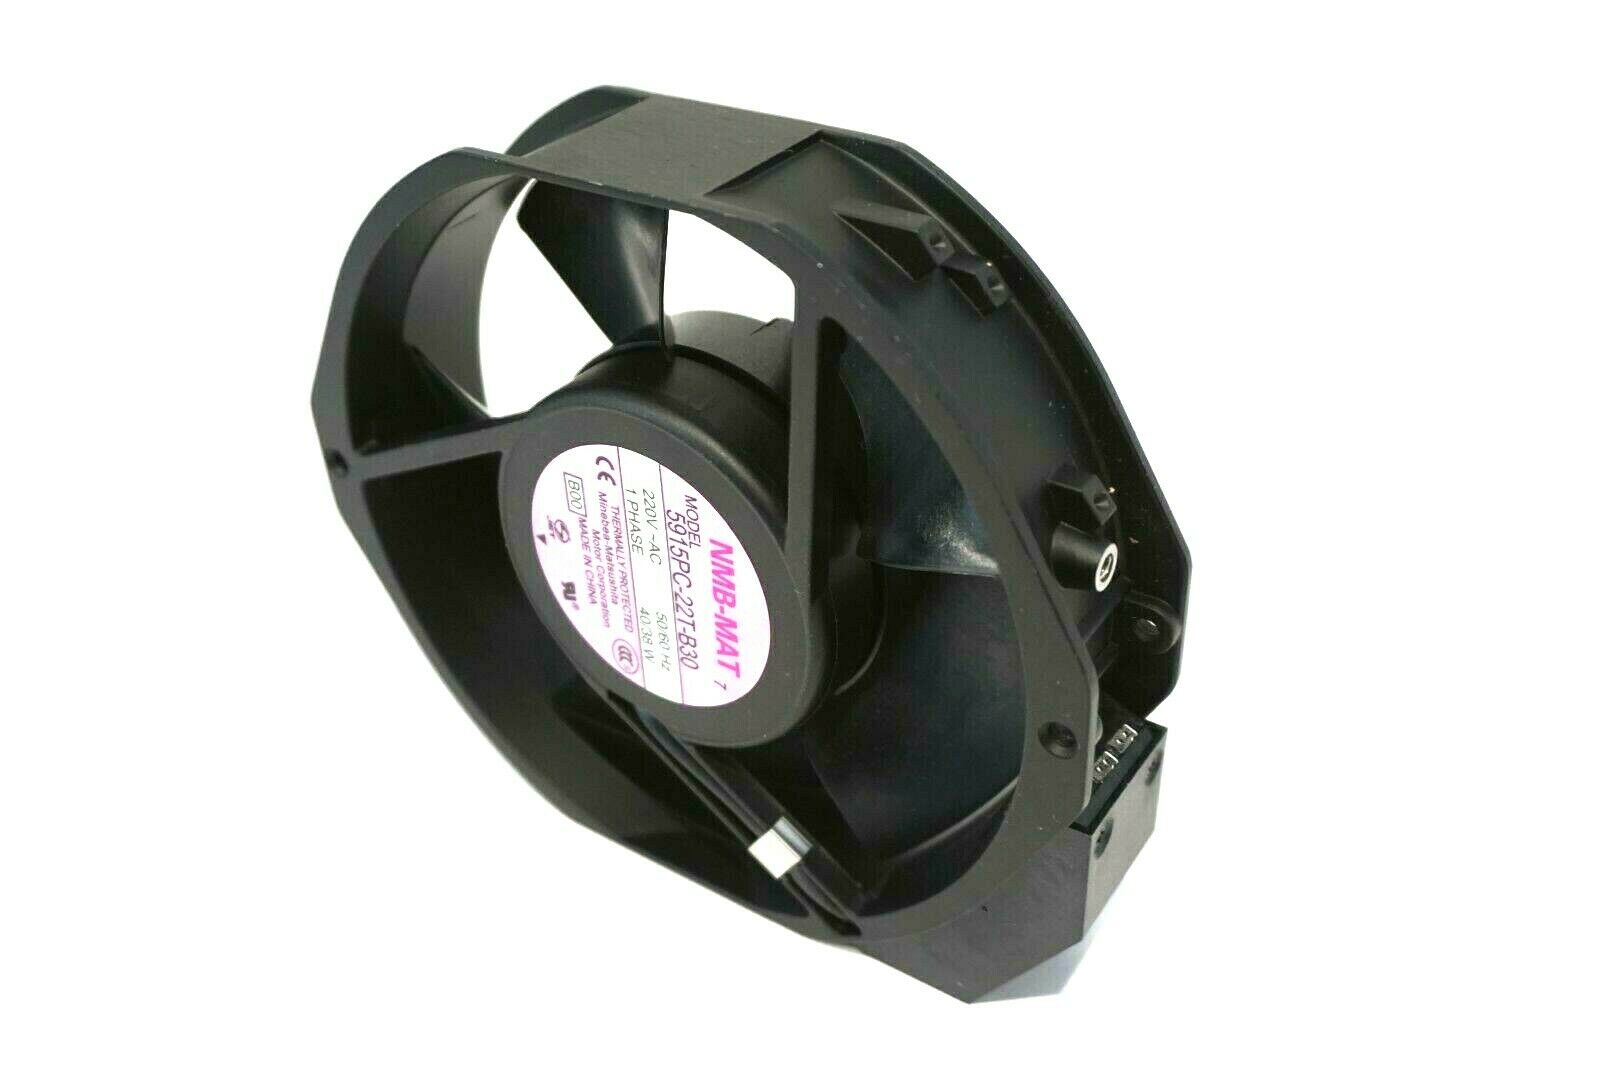 MINEBEA NMB 5915PC-22T-B30 220 VAC 1 PH 40/38 W THERMALLY PROTECTED FAN 